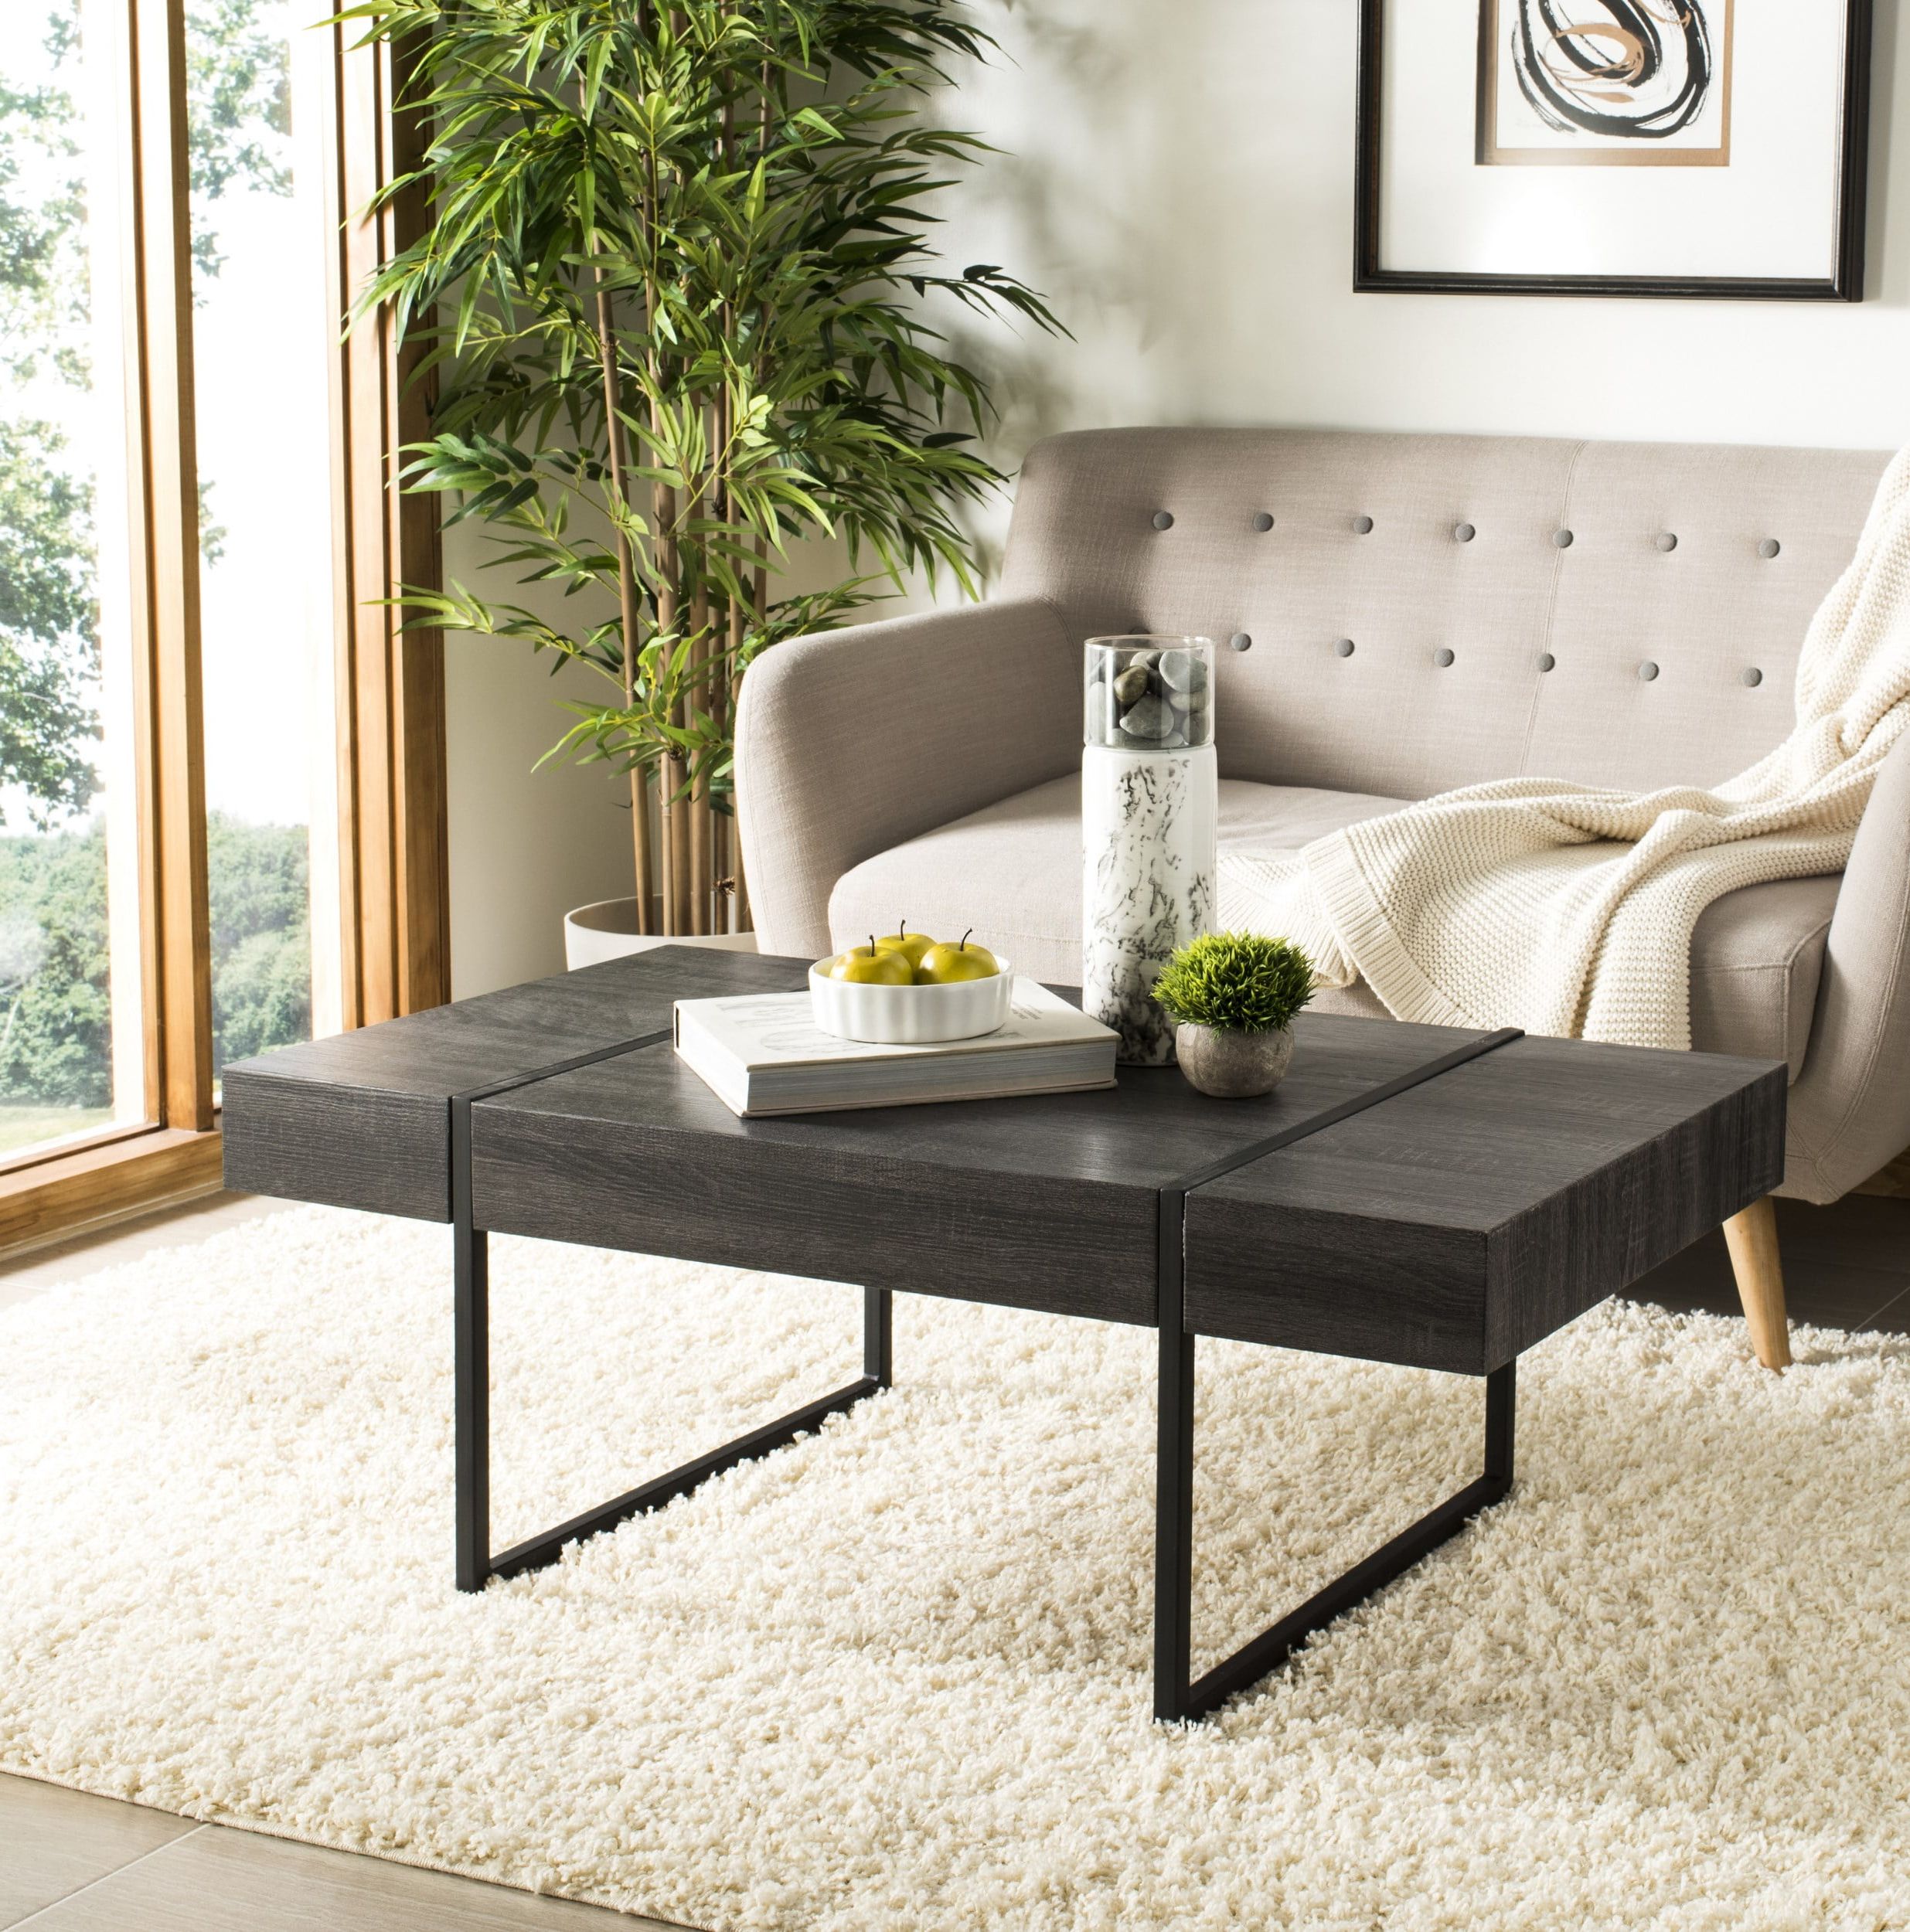 Latest Rectangular Coffee Tables With Pedestal Bases For Safavieh Tristan Rectangular Modern Coffee Table Black – Walmart (Photo 1 of 15)